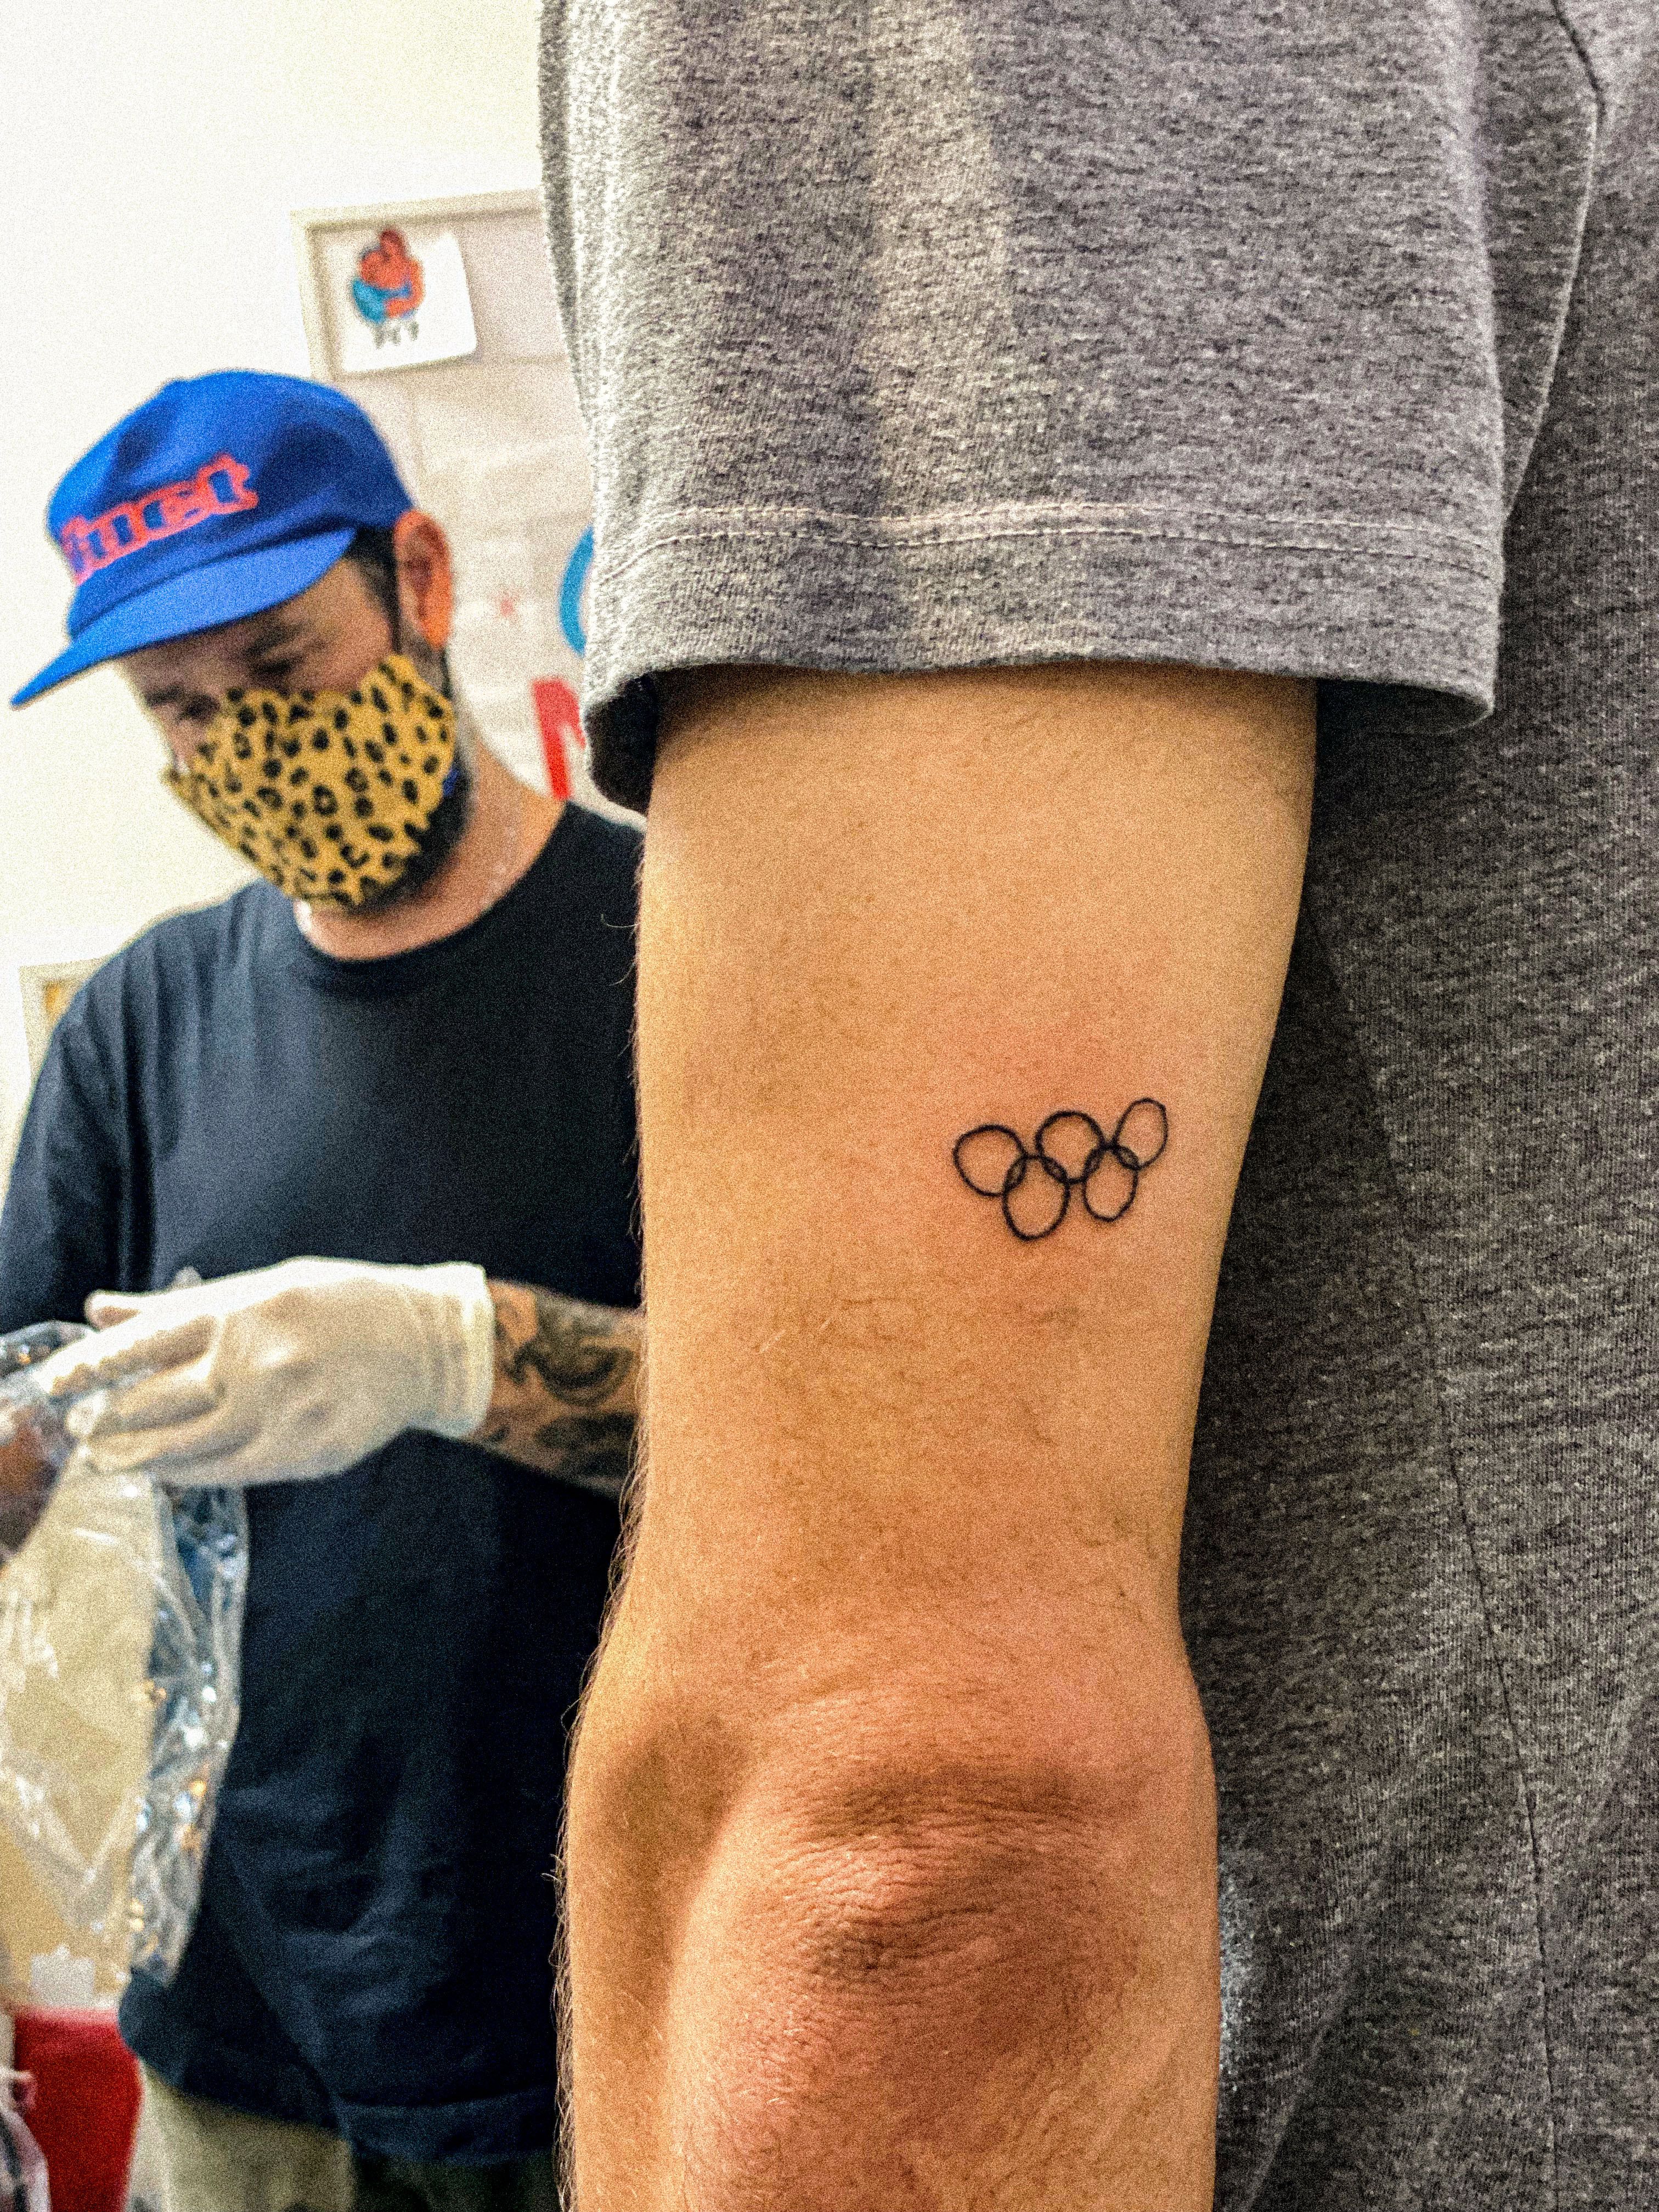 Olympic ink Athletes tattoos commemorate games